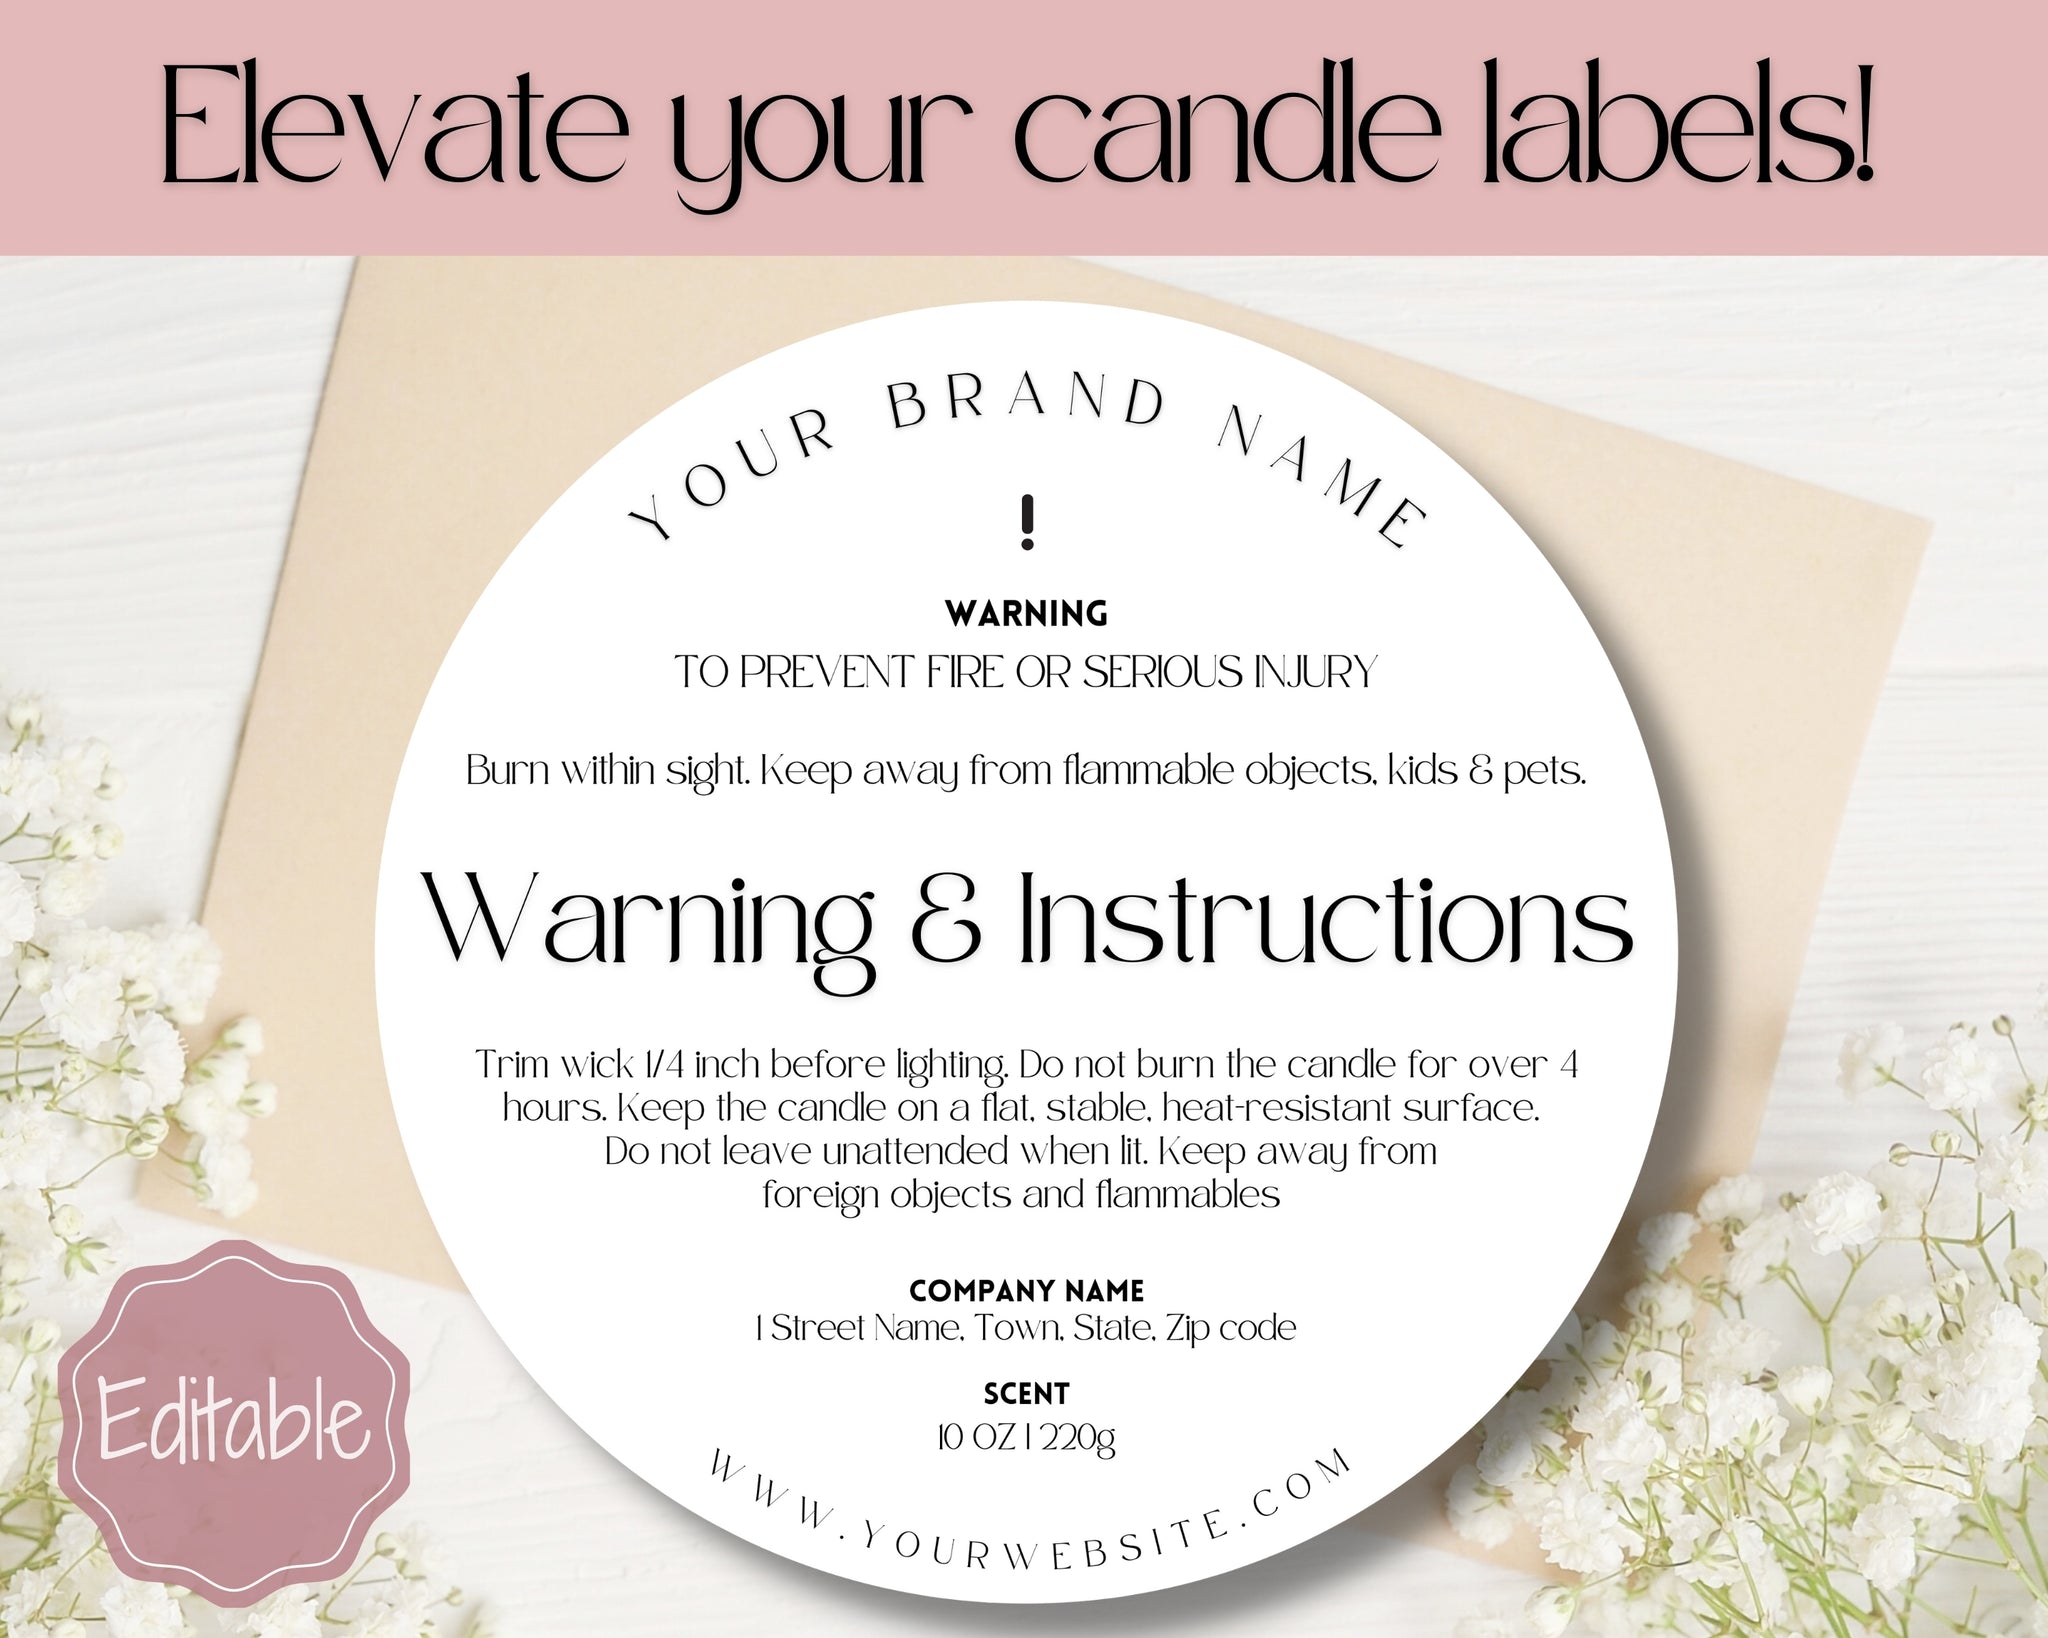 Candle Warning Label Template with Icons (1869274)